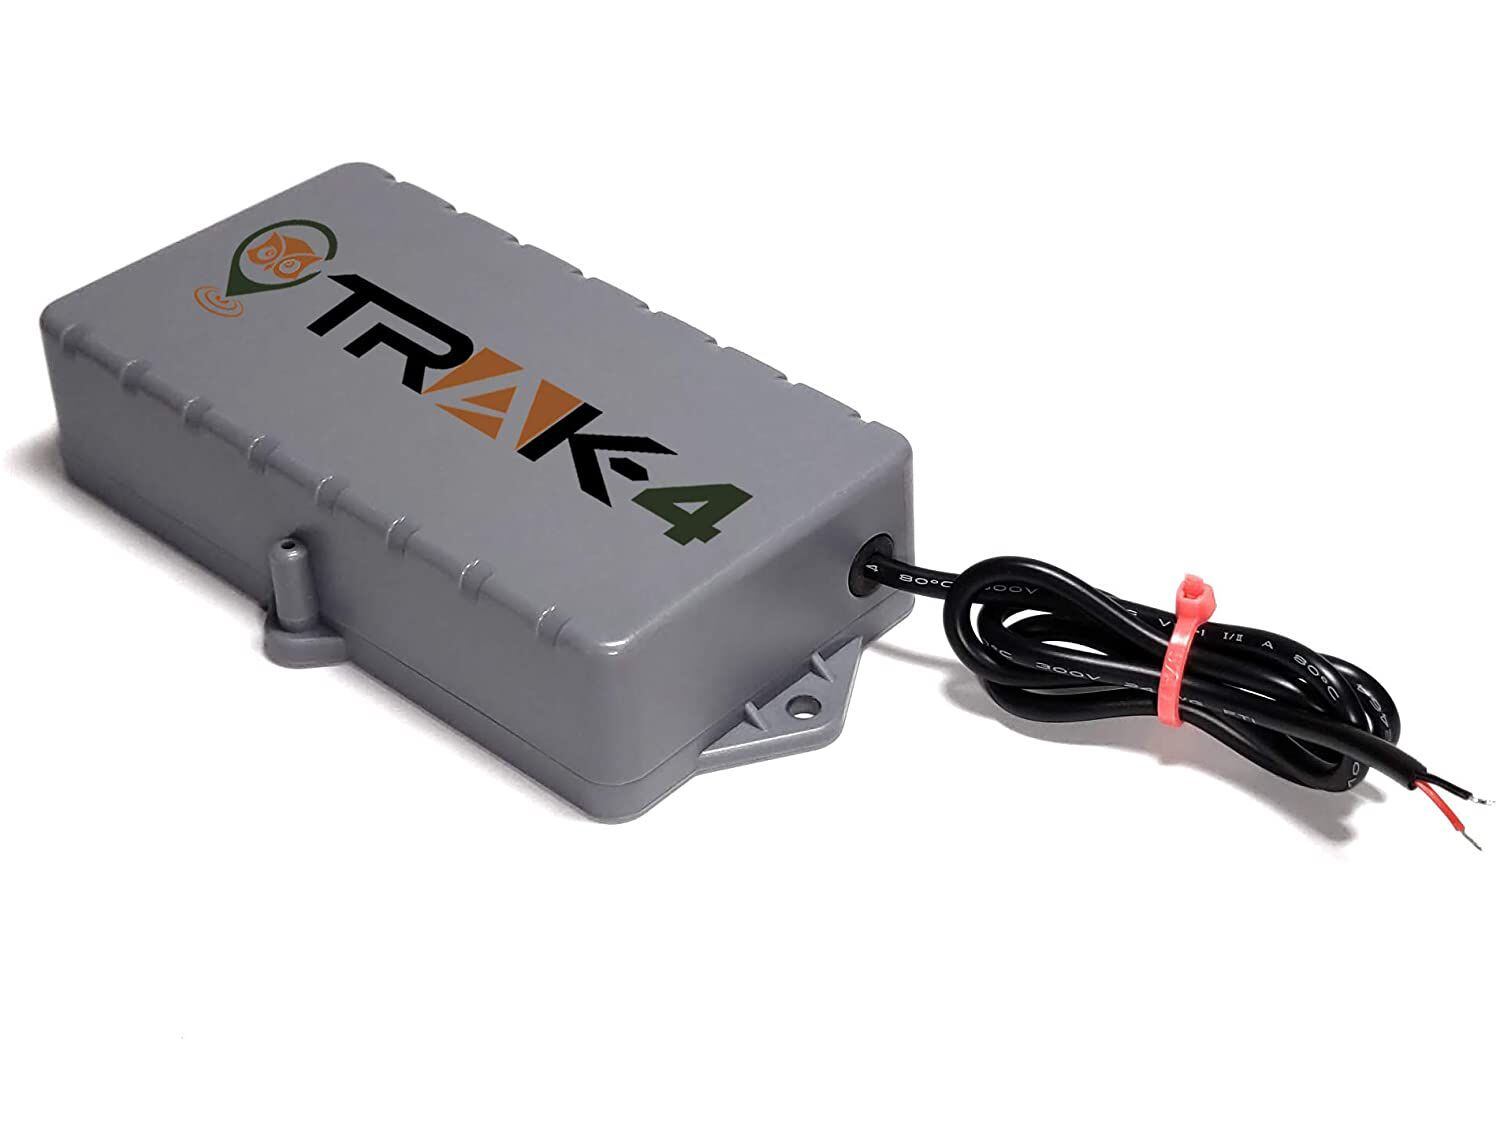 A standard hardwired tracker lets you monitor your ATV’s location from anywhere.